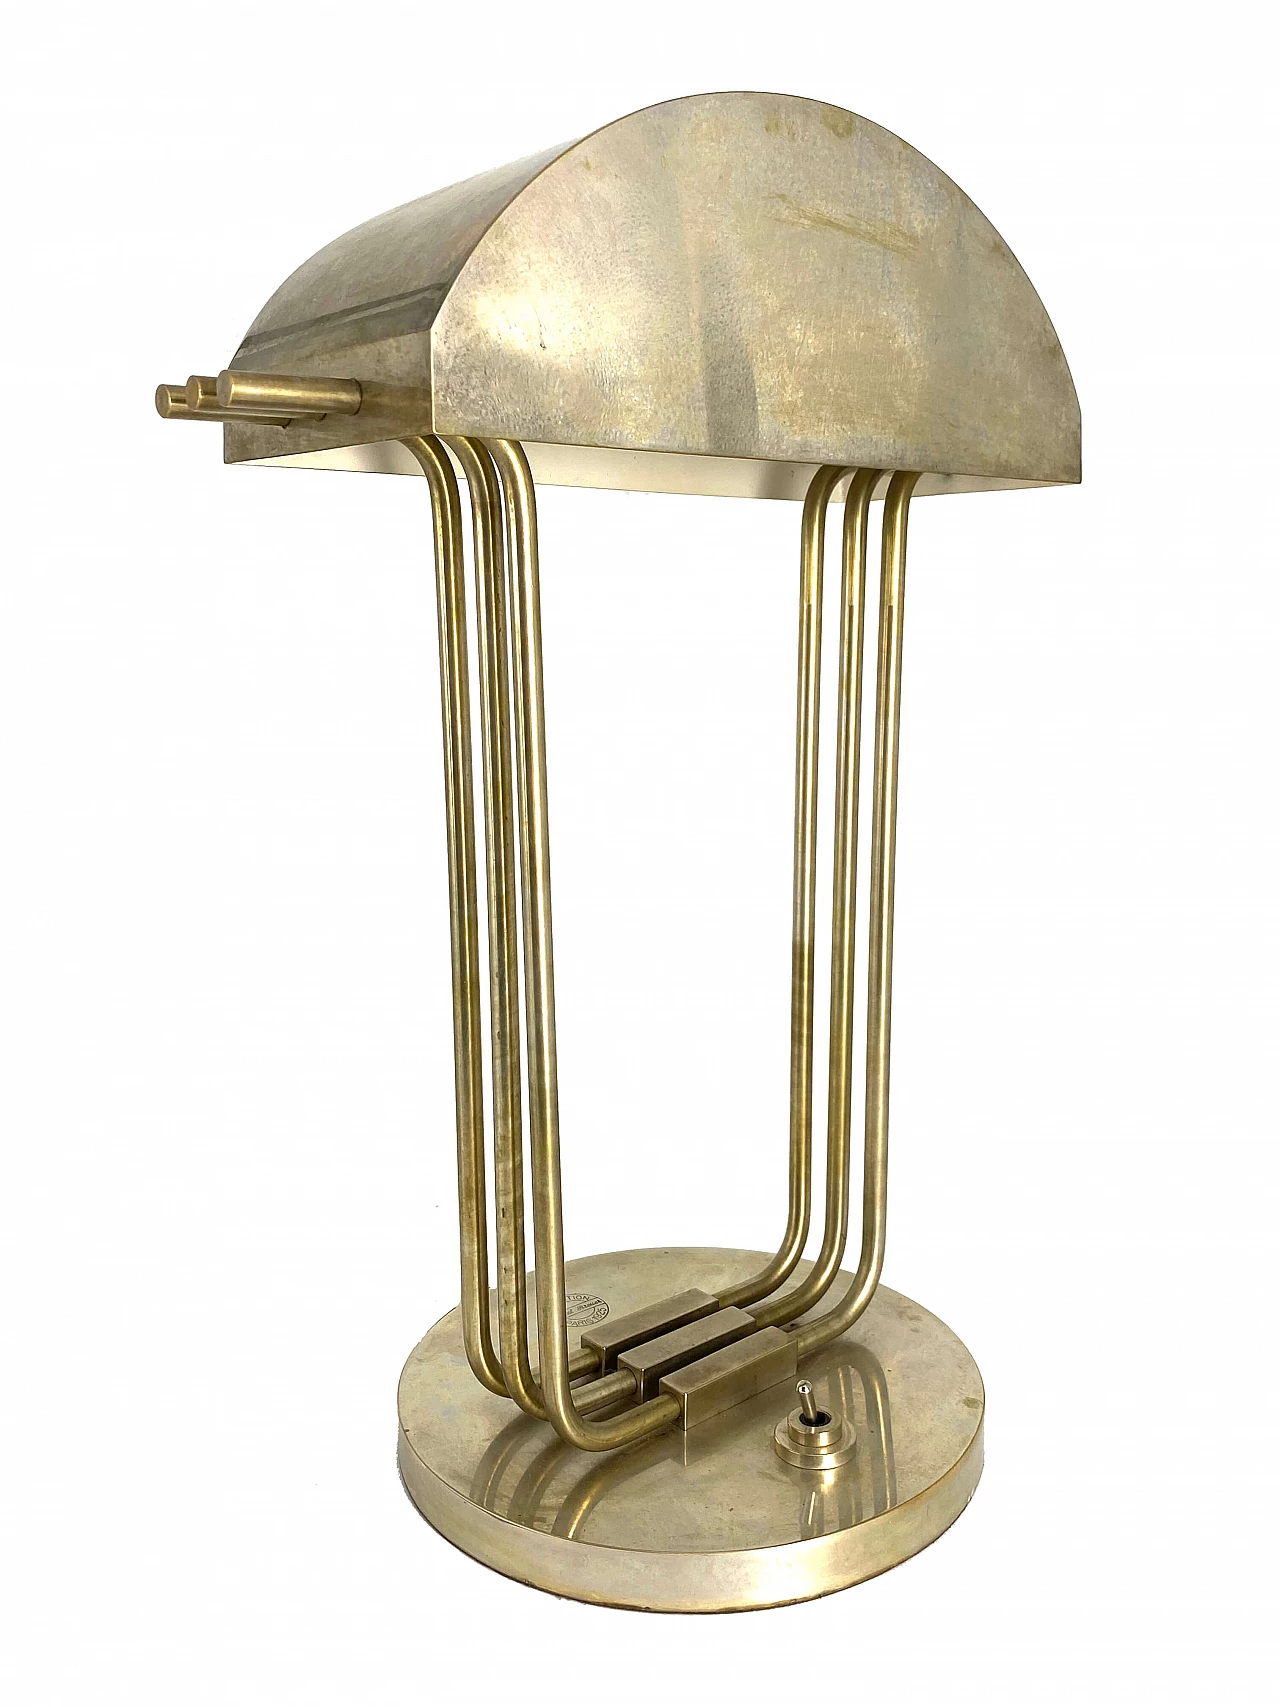 Table lamp designed by Marcel Breuer for the Paris Expo in 1925, signed 1102256